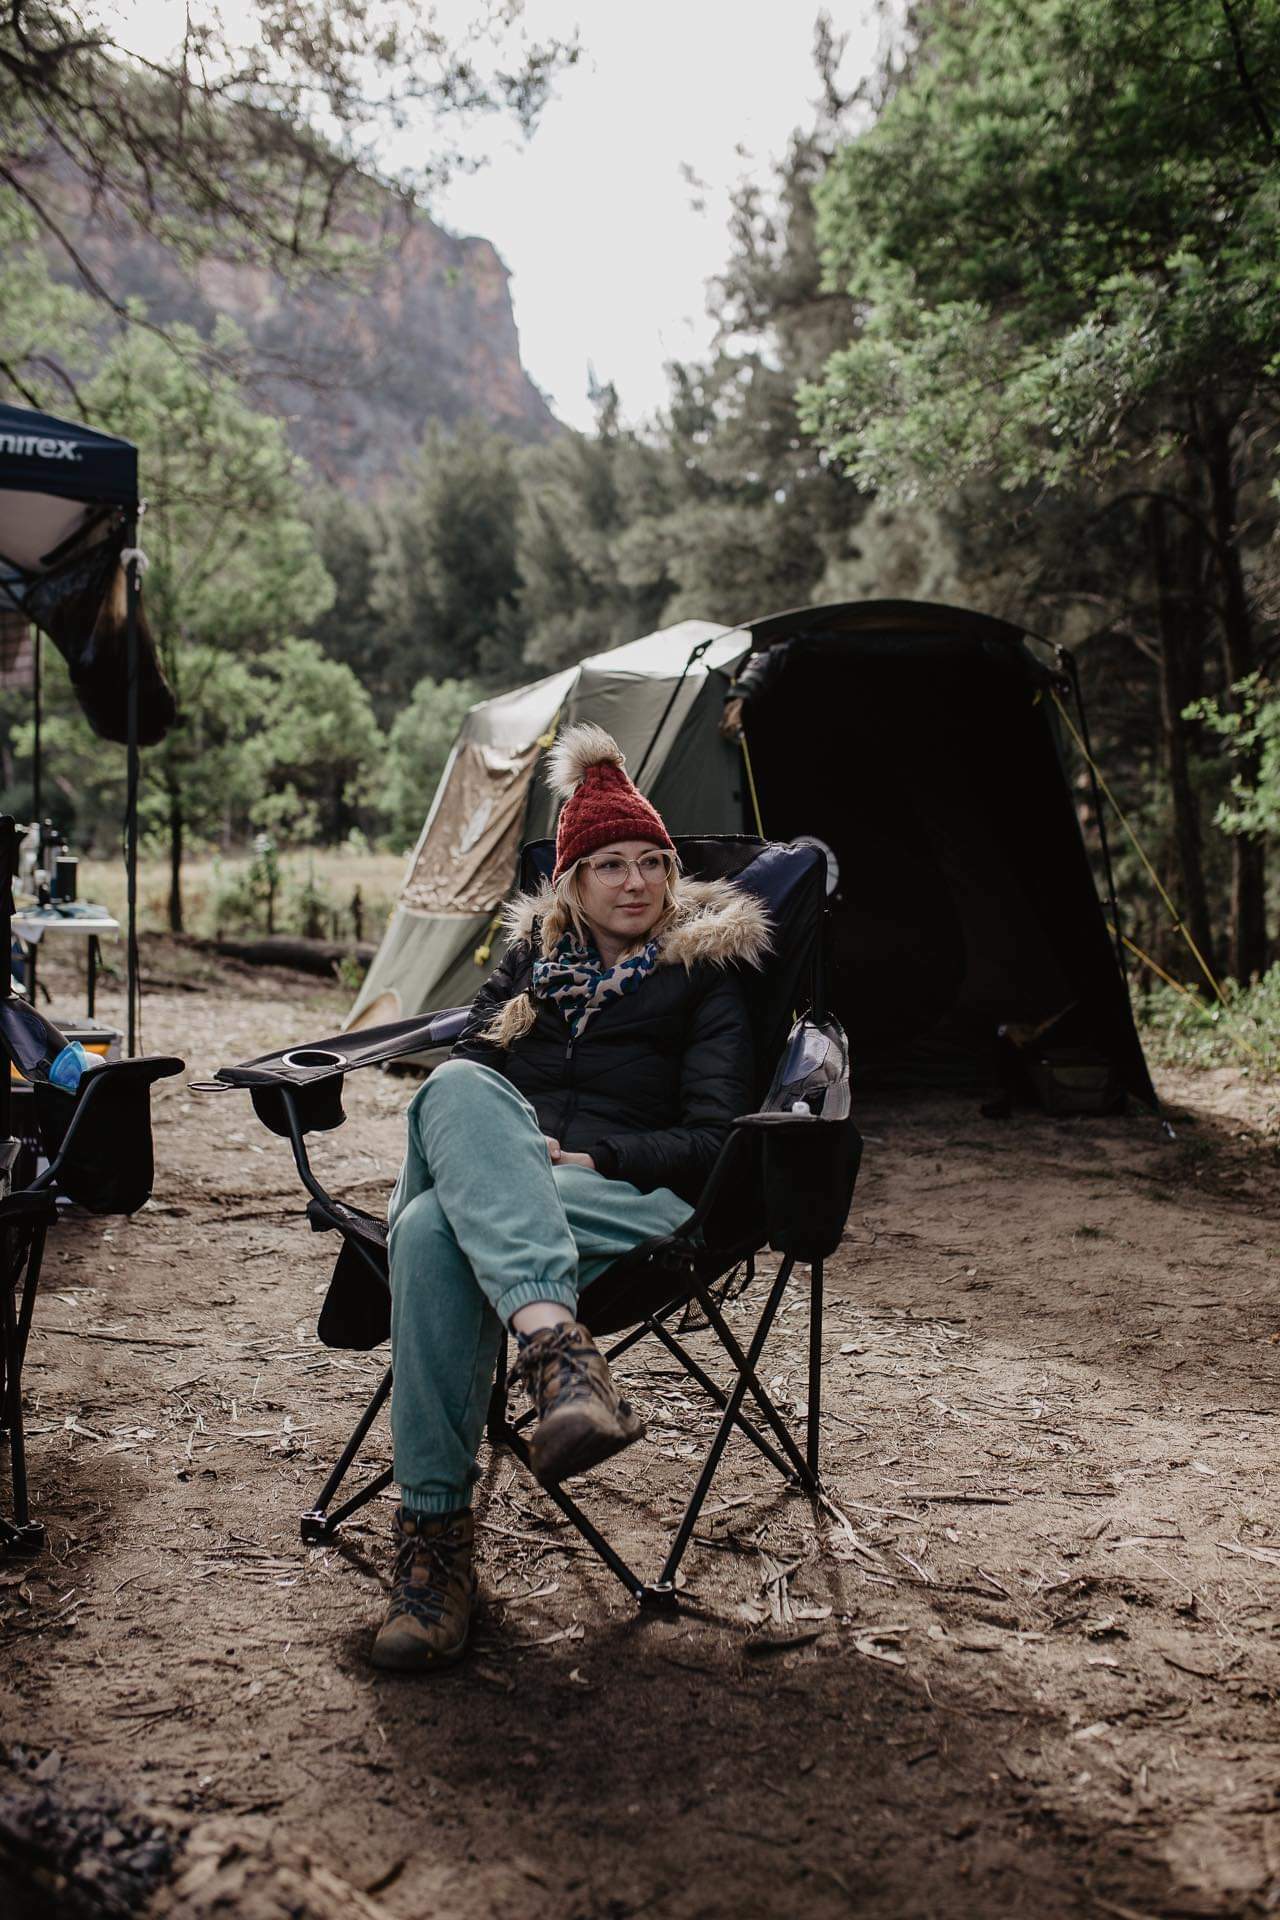 10 Items You Need to Take Your Camping to the Next Level